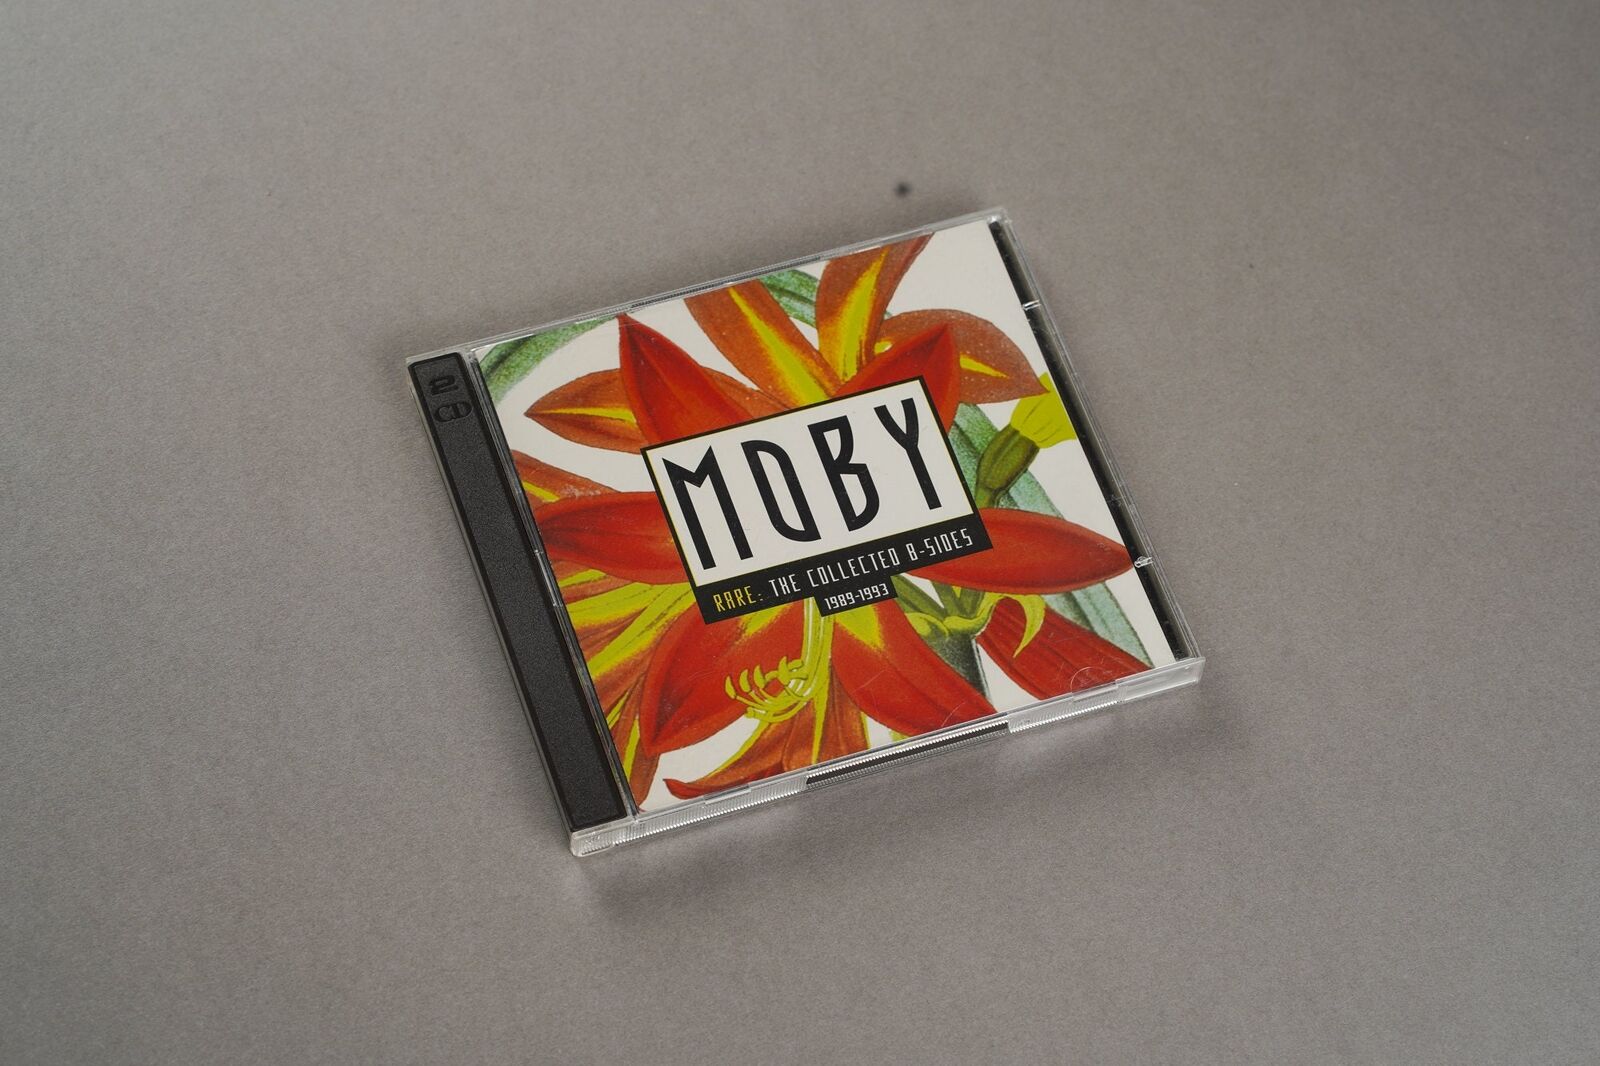 Moby - Rare: The Collected B-Sides (1989–1993) - 1996 Original 2 CD Set Compact